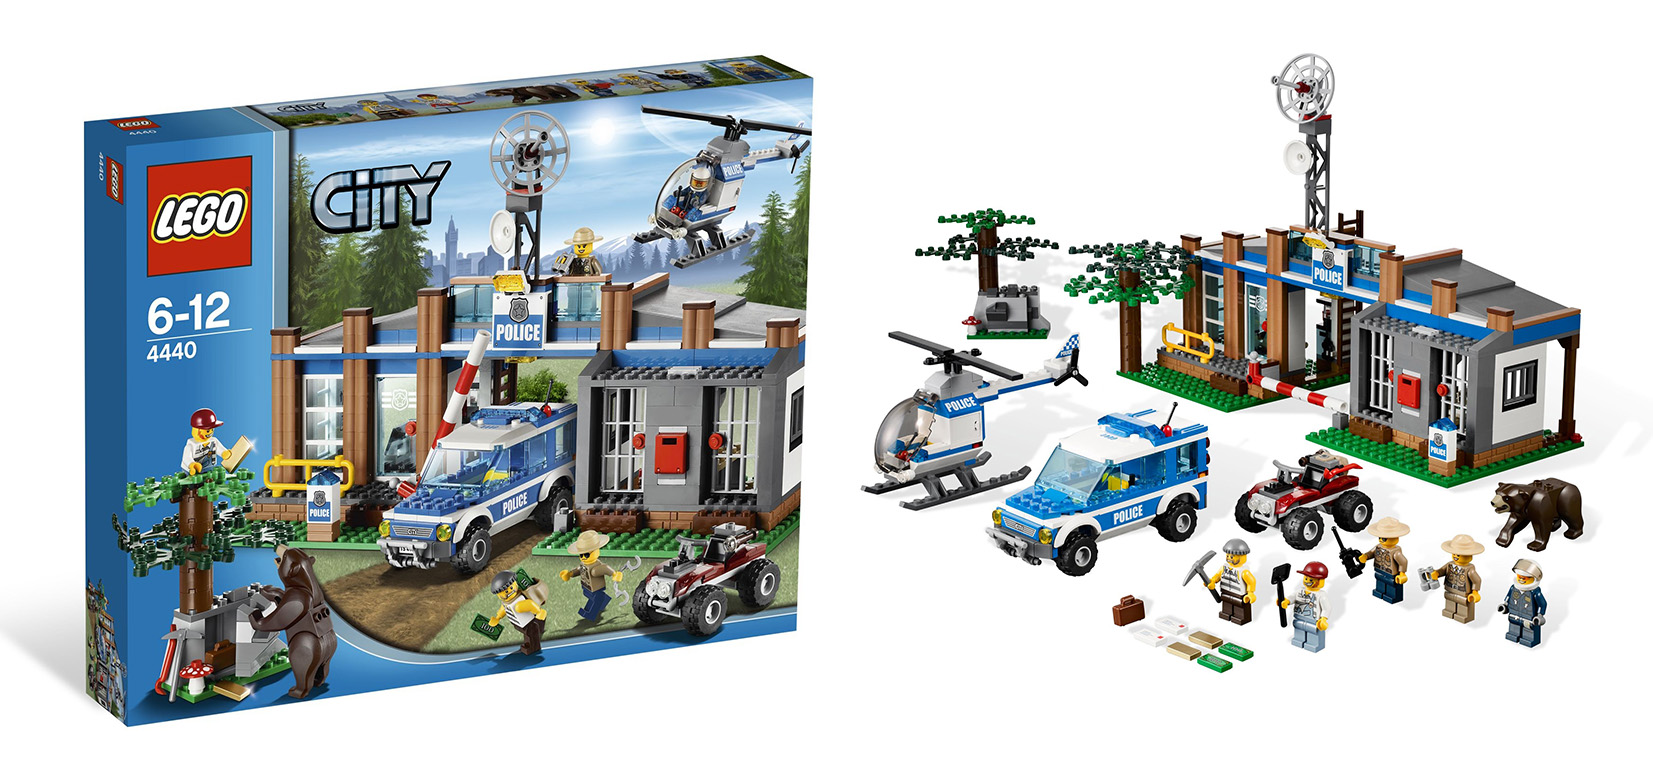 Evolution of the Police Headquarters Sets